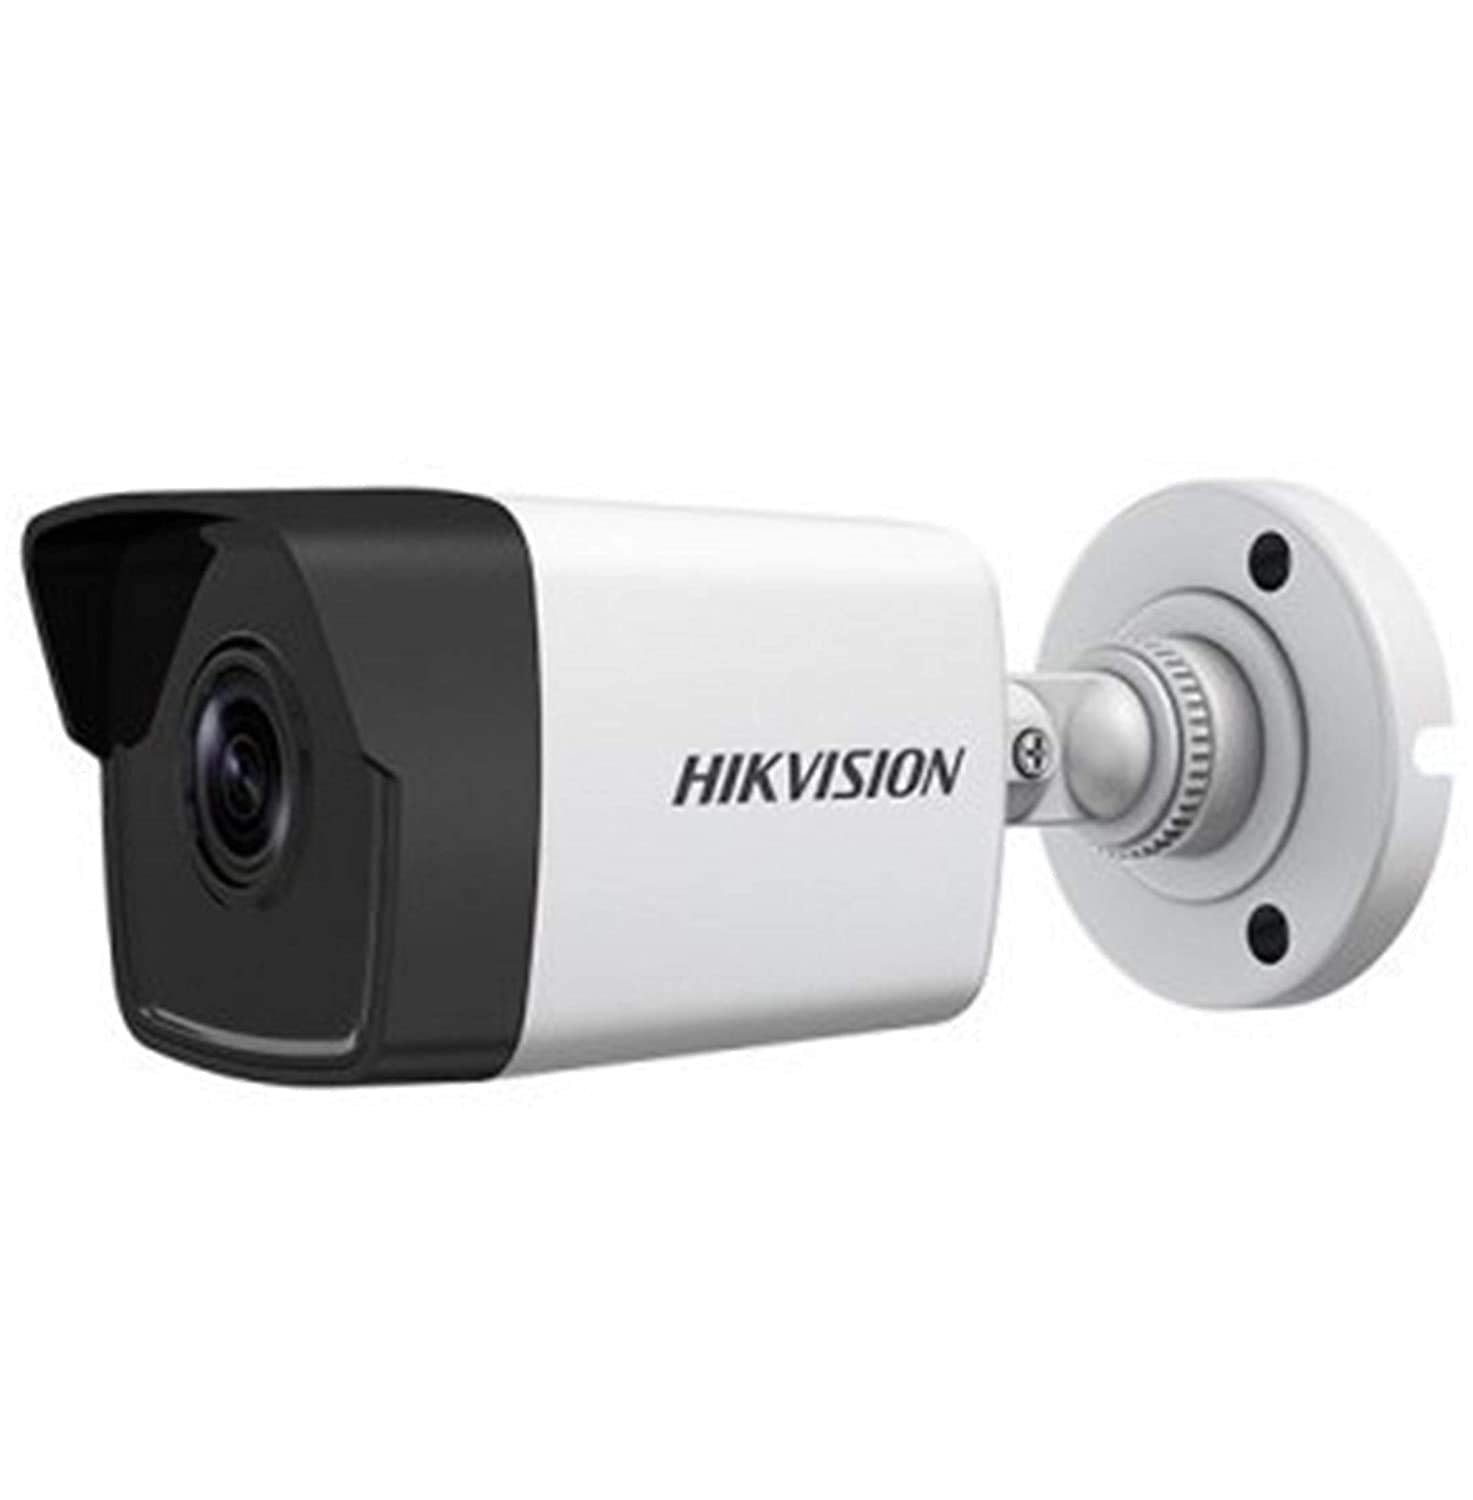 HIKVISION IP 1920x1080p 2MP Wireless Security Camera (White)